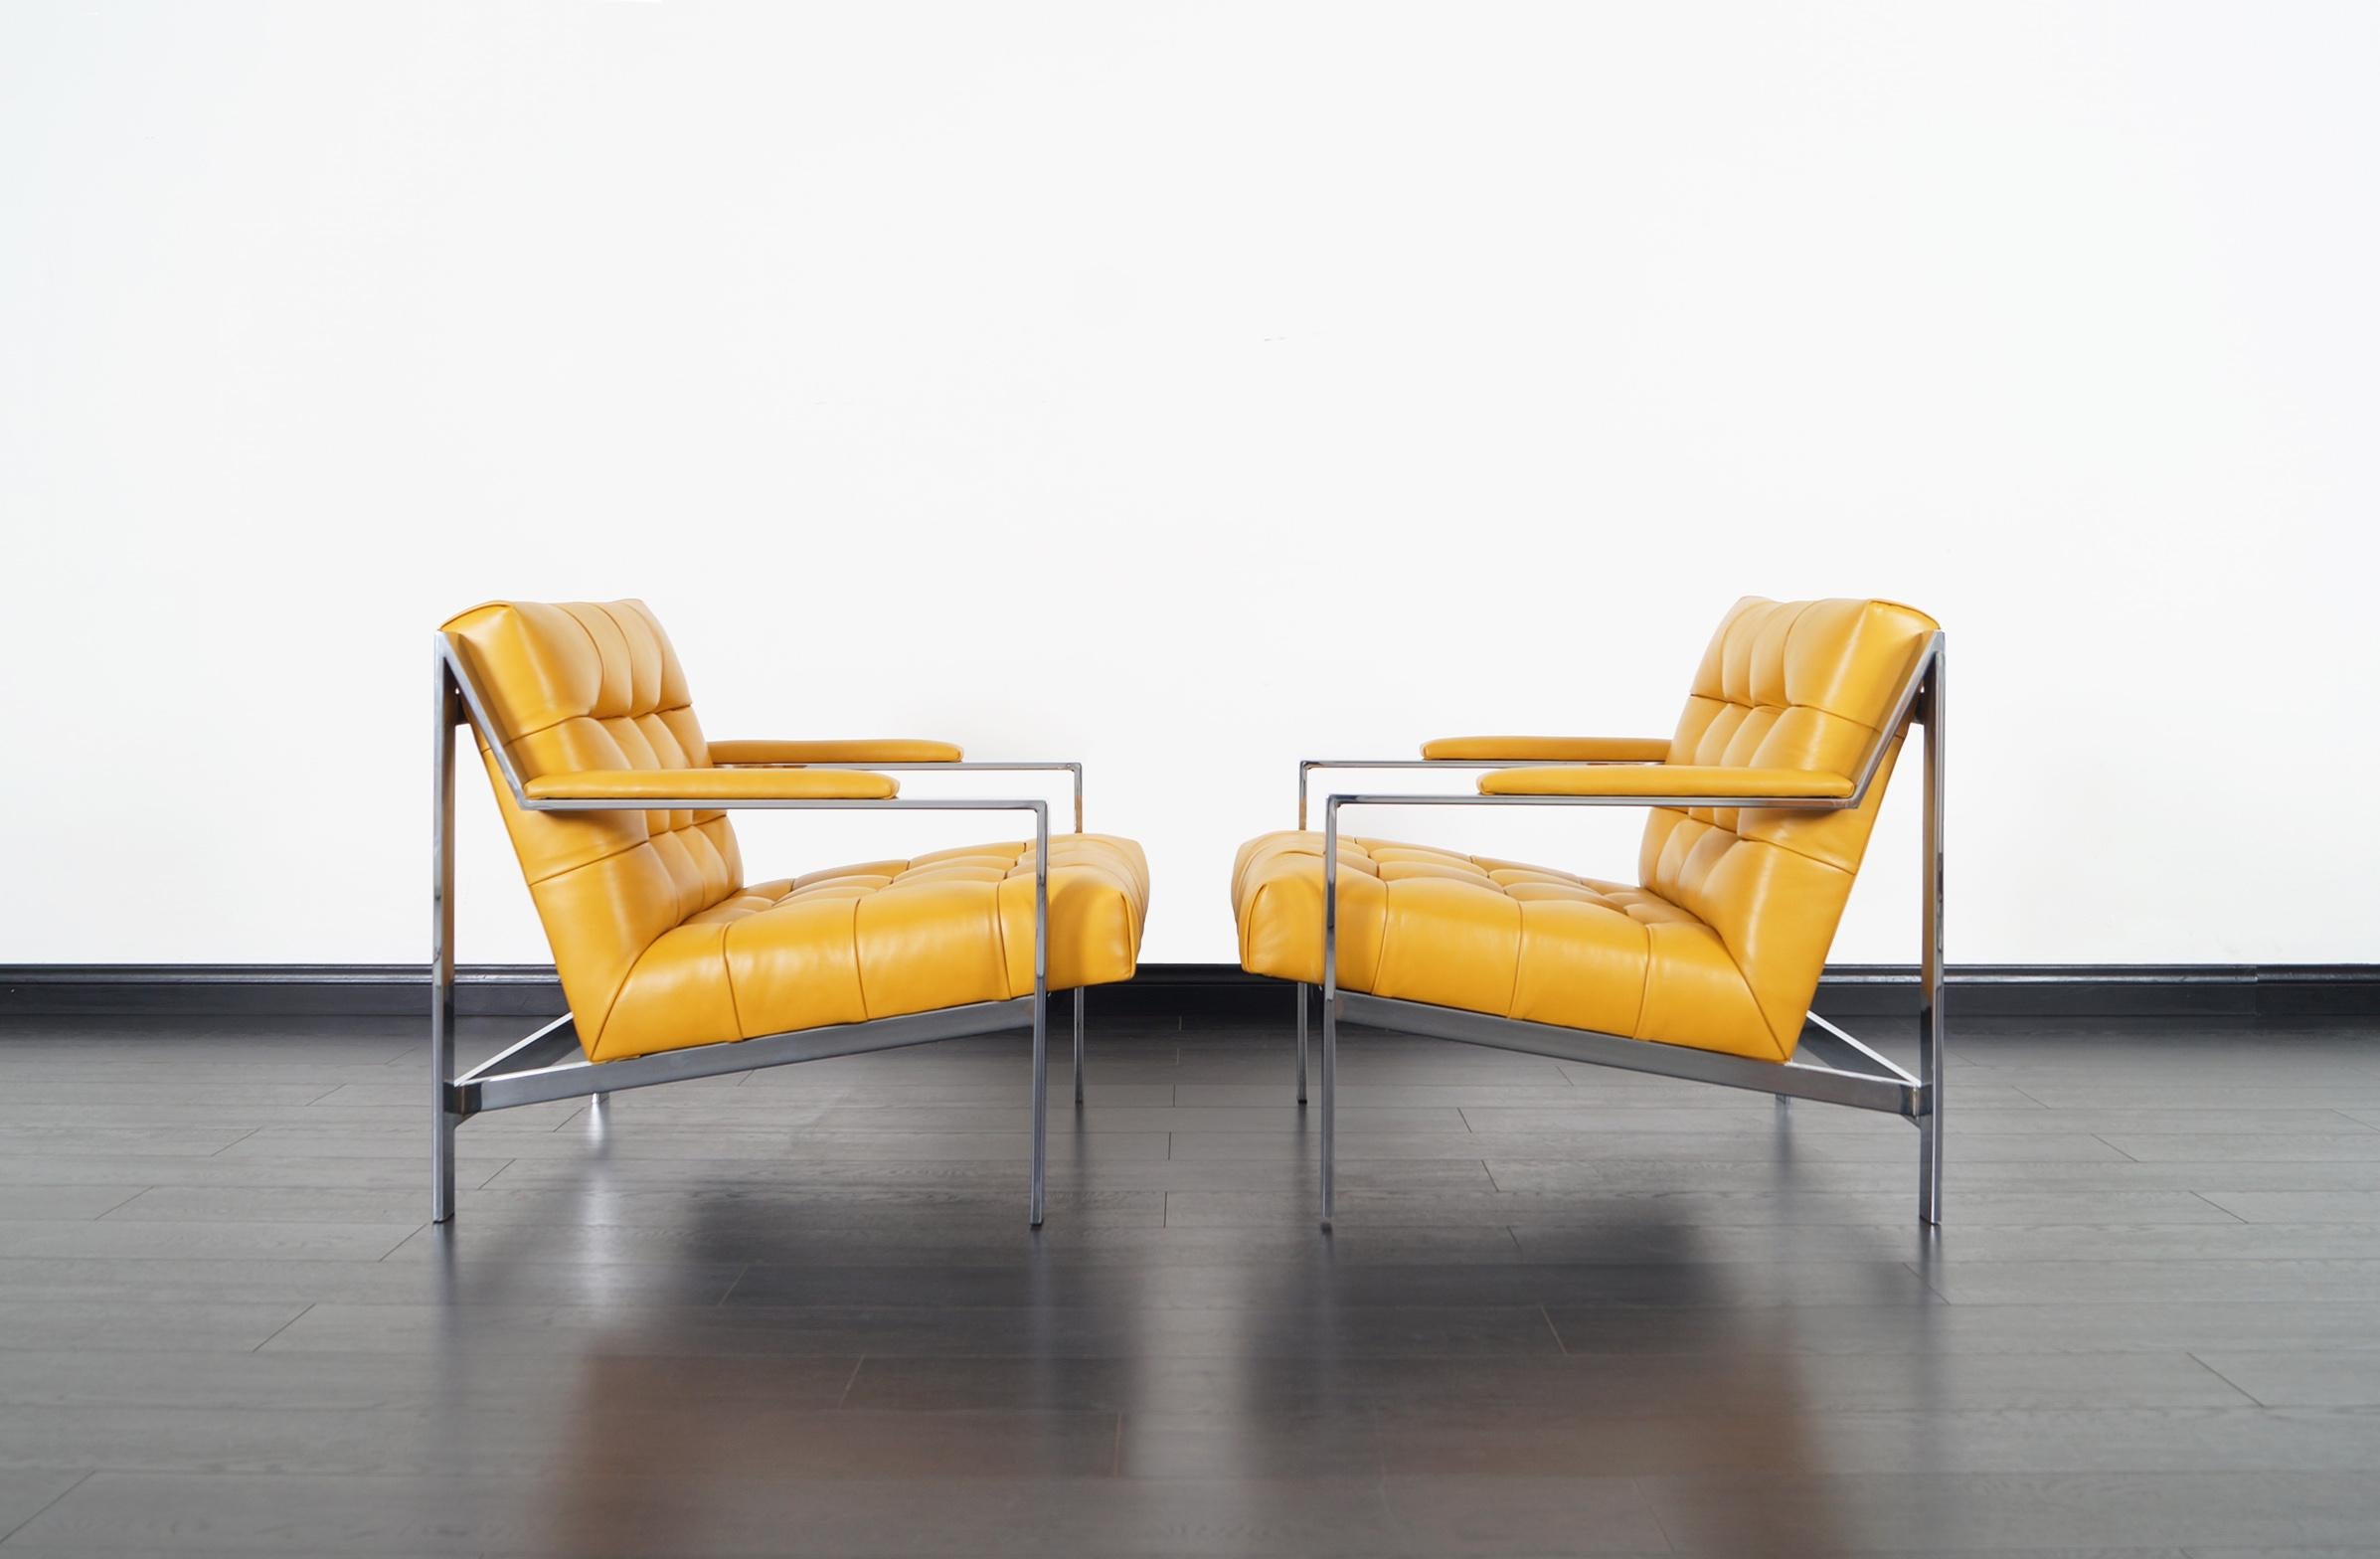 Vintage Chrome and Leather Biscuit Tufted Lounge Chairs by Cy Mann (Ende des 20. Jahrhunderts)